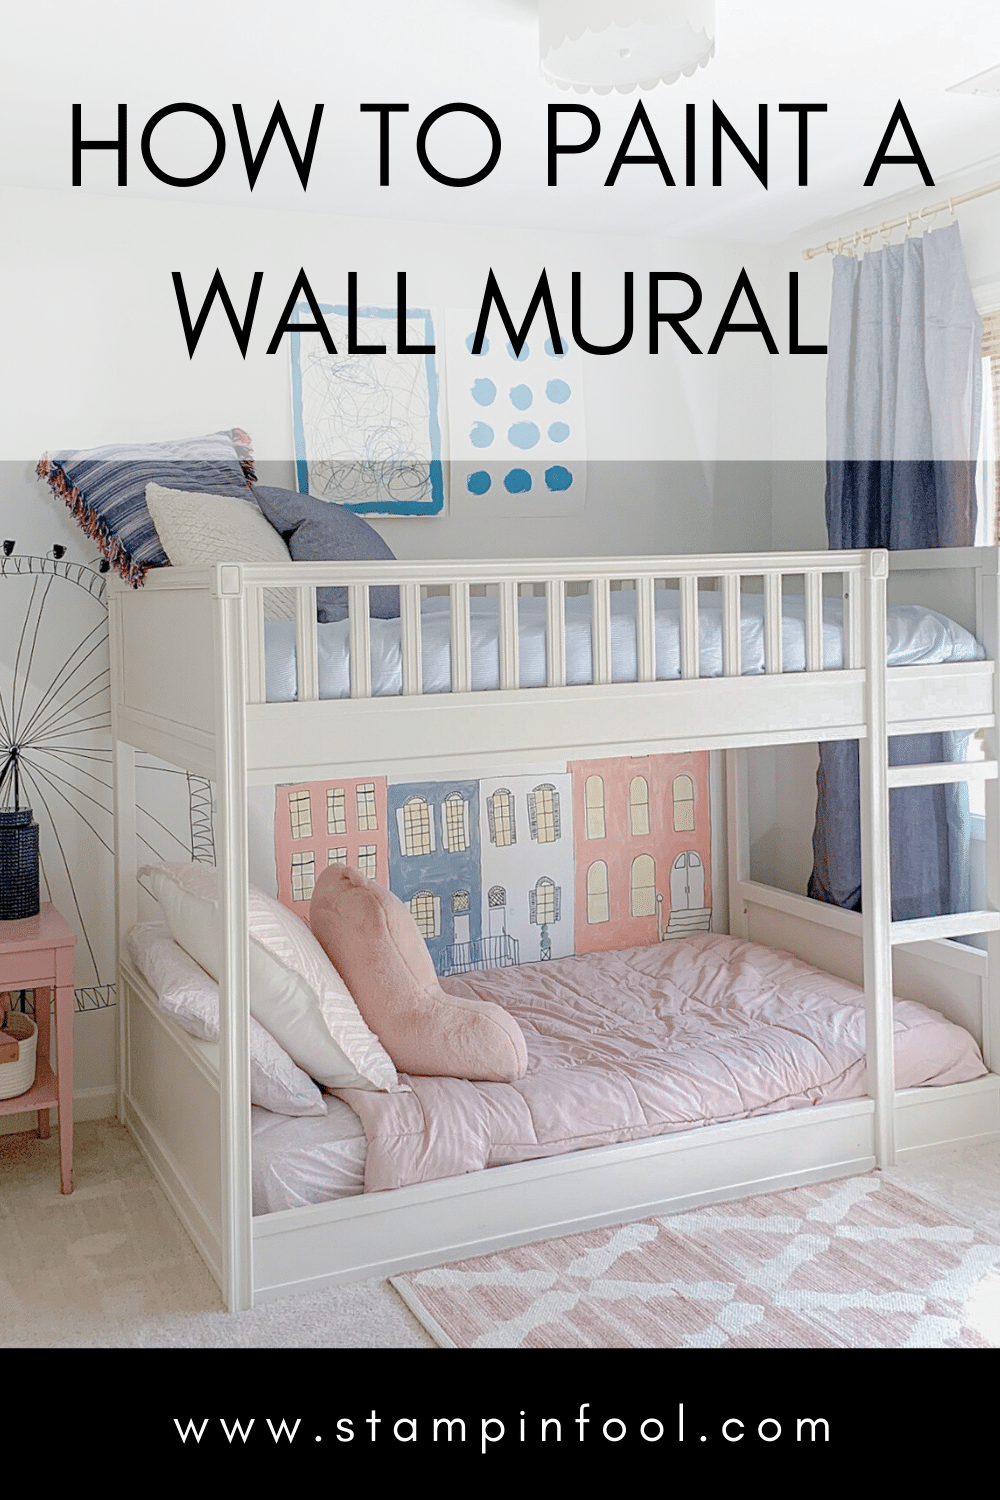 How to Paint a Wall Mural: The DIY Step by Step Guide